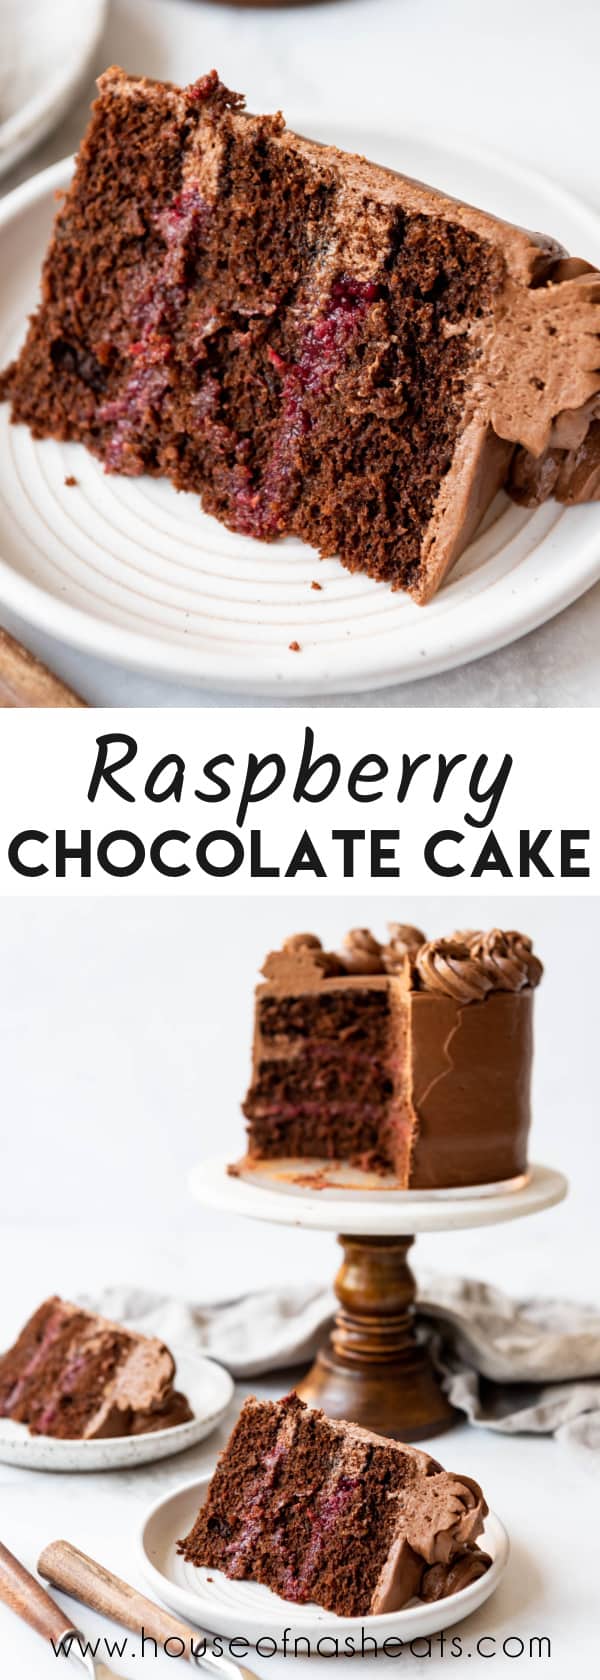 A collage of raspberry chocolate cake images with text overlay.